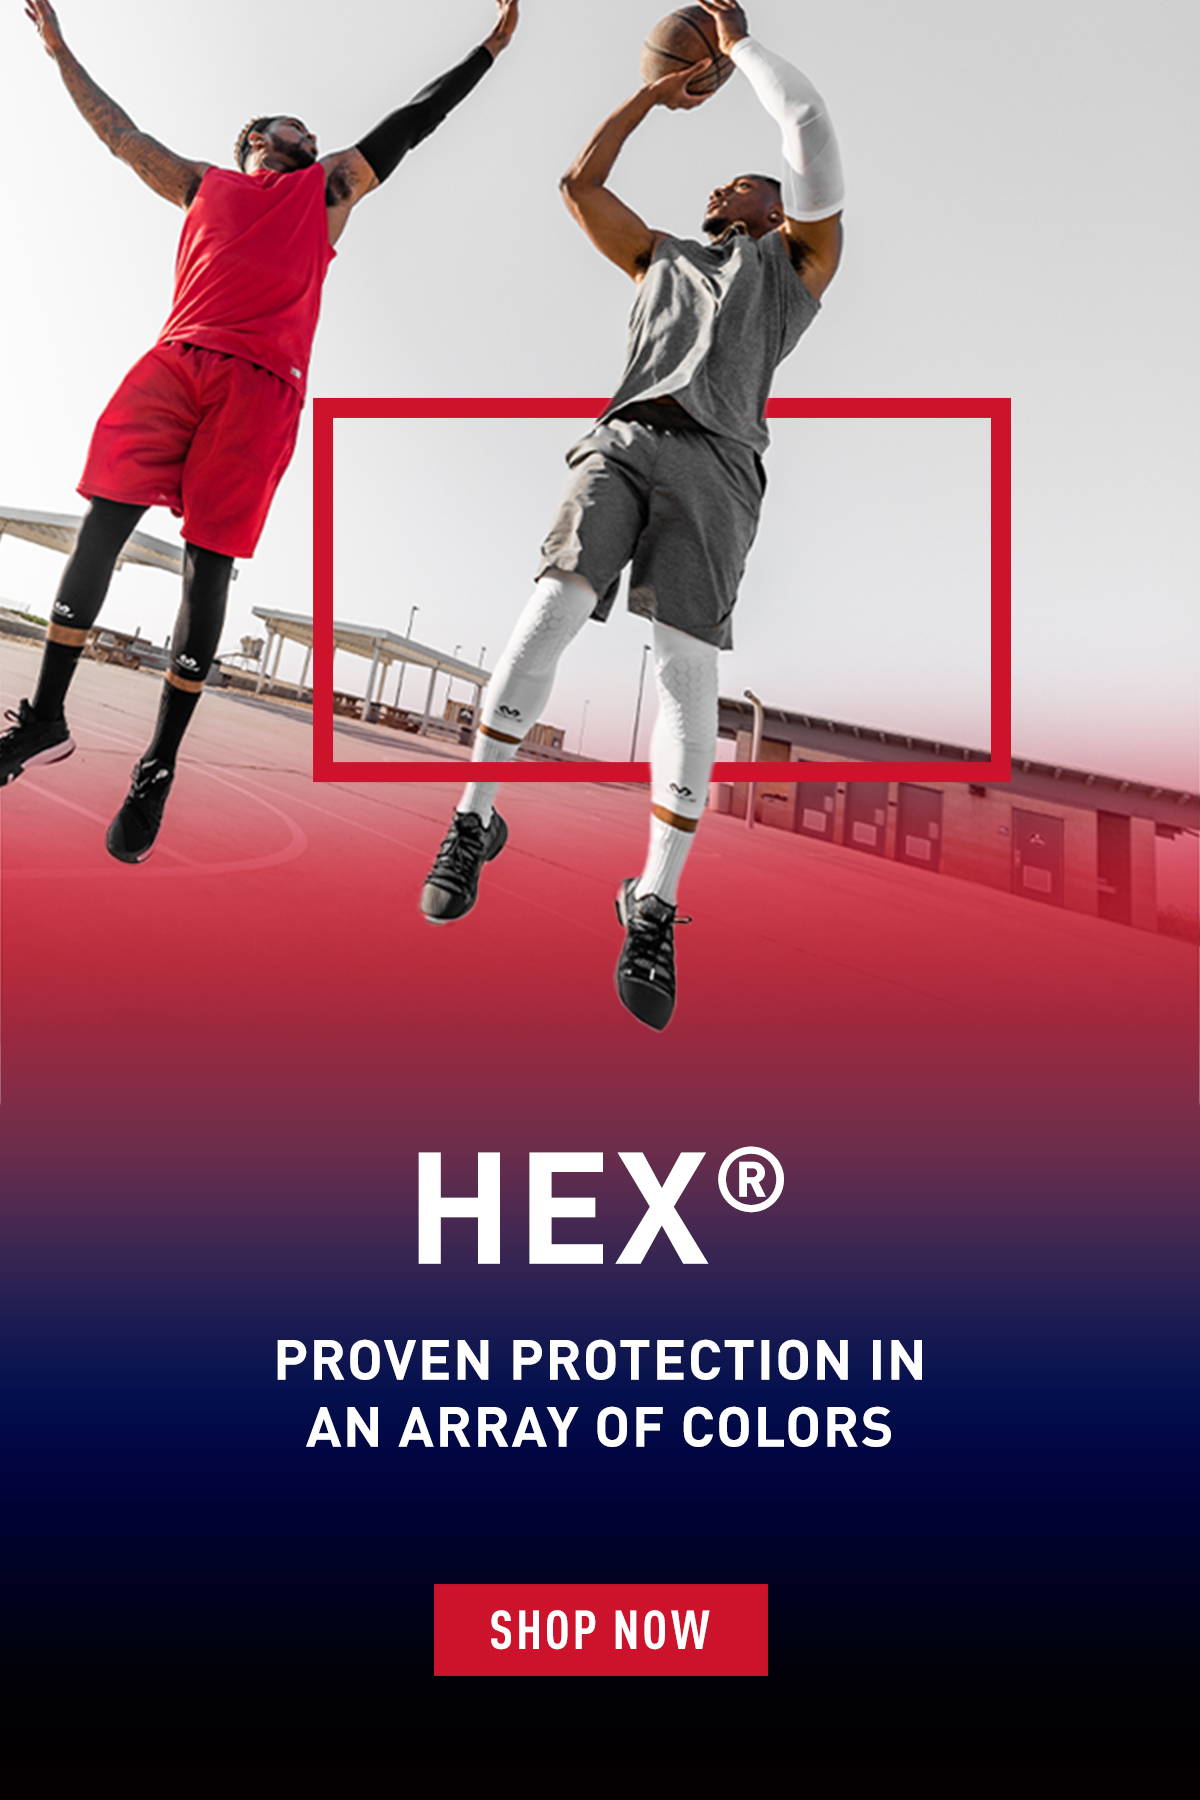 HEX Proven protection in an array of colors